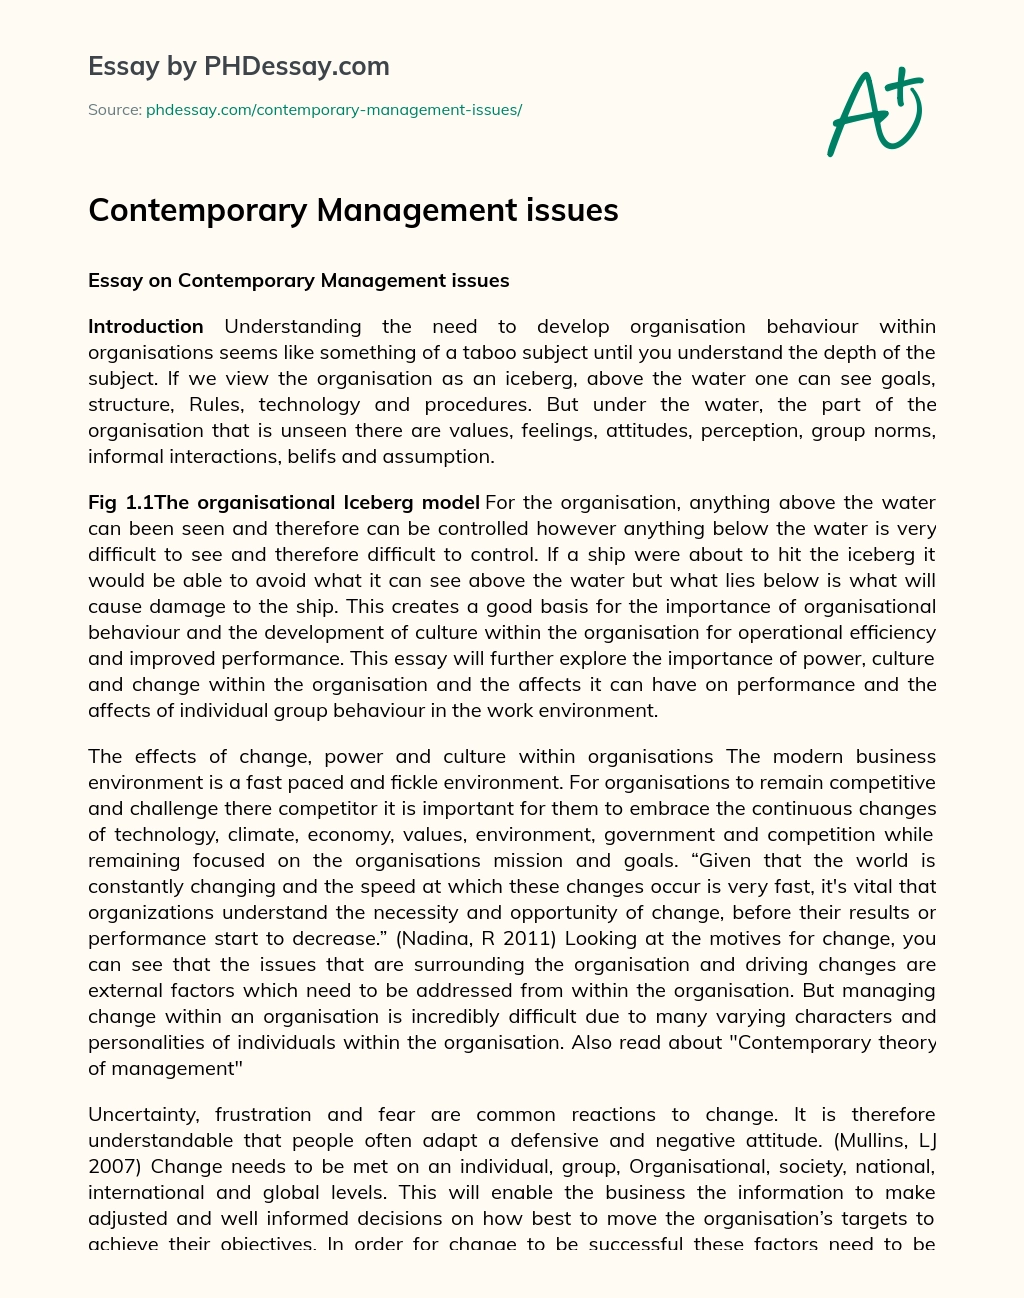 Contemporary Management issues essay